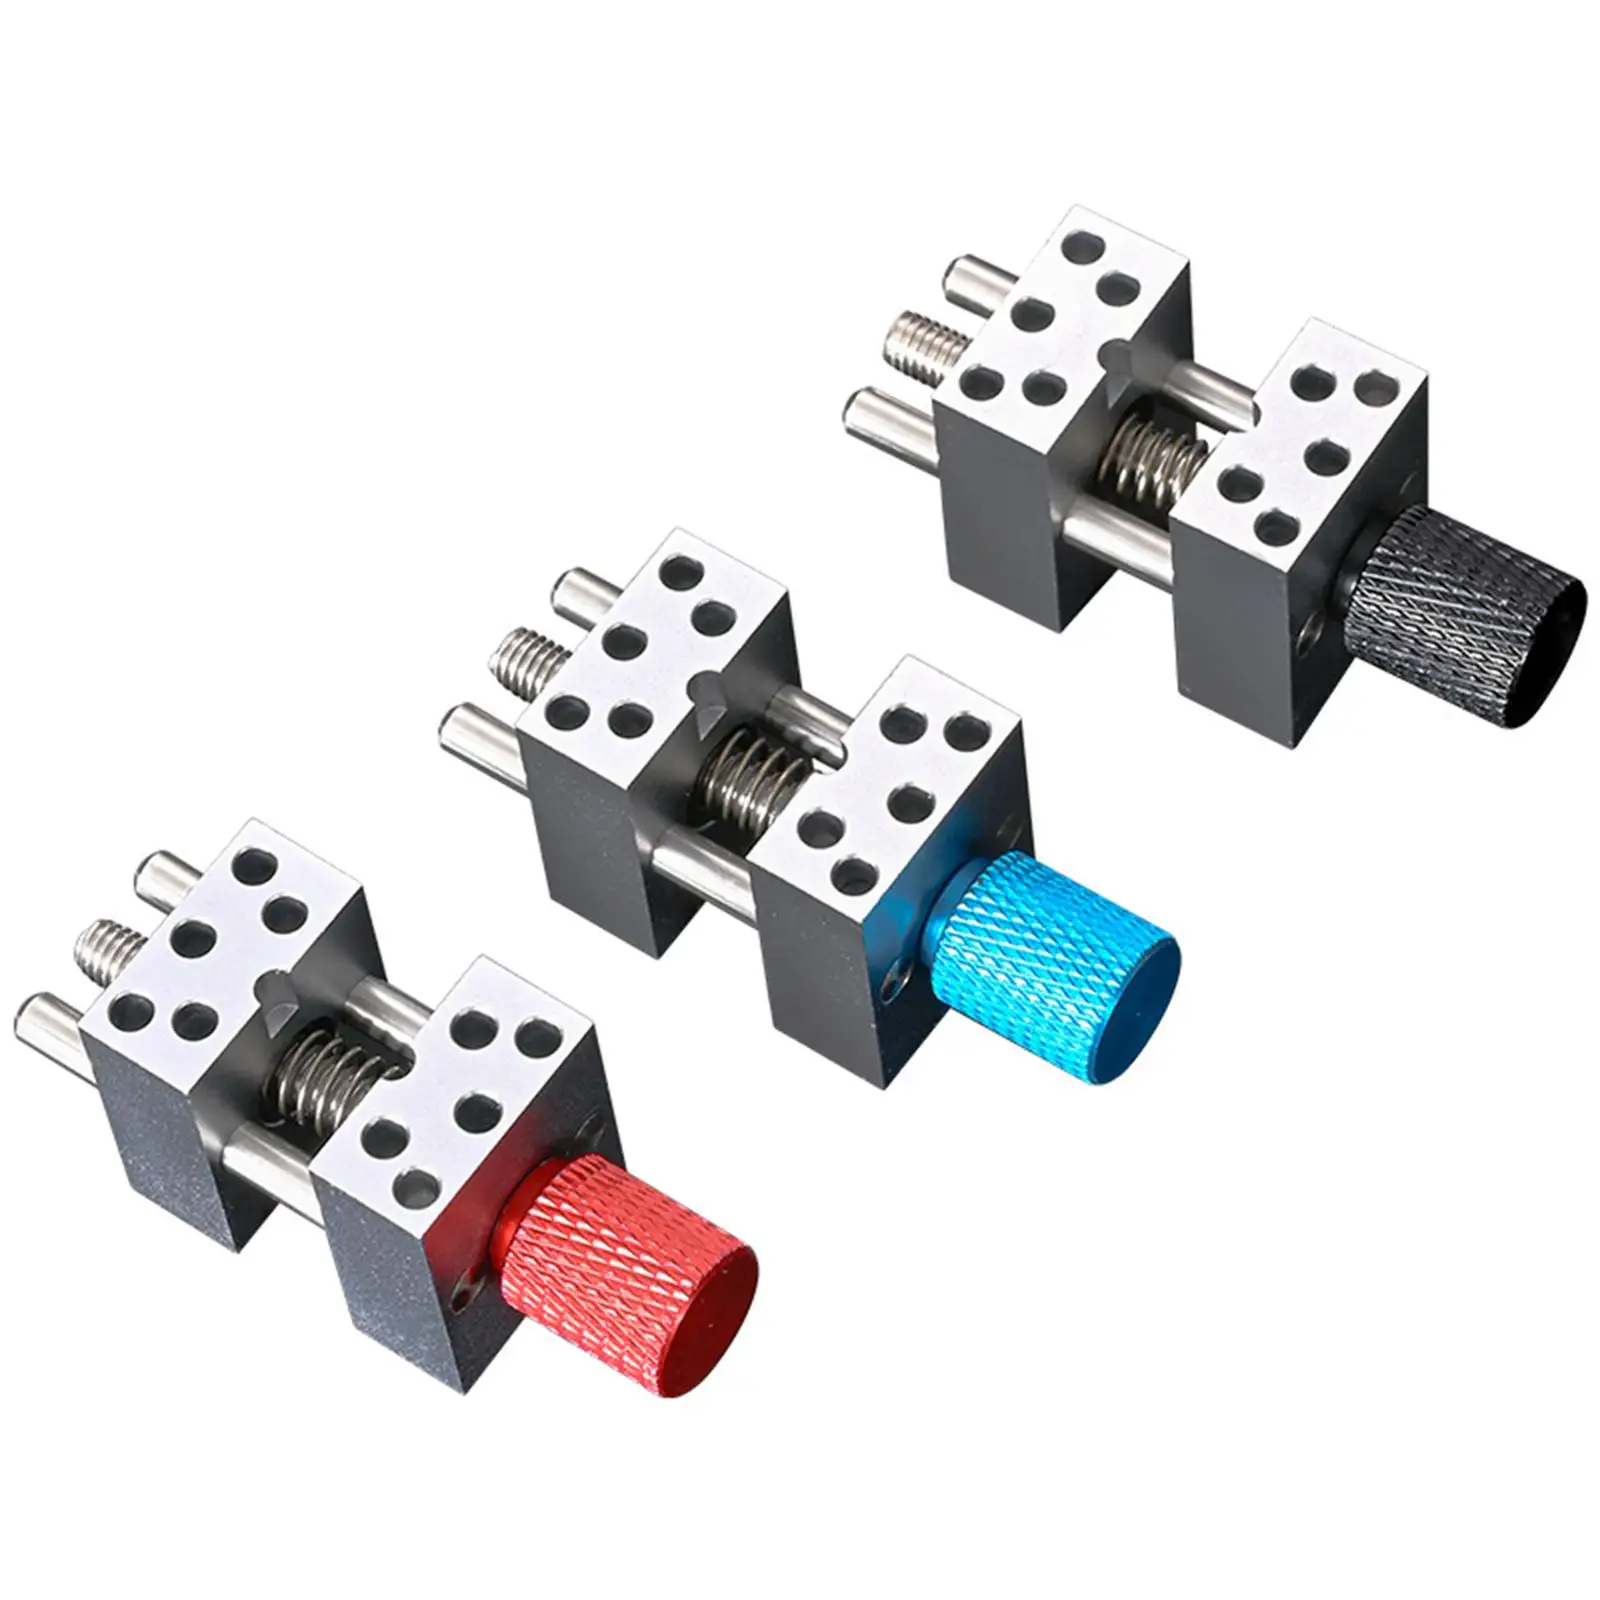 Mini Drill Press Vise Clamp Model Crafts Tools for Assembly Model Building Tools Model Parts Engraving Cutting Hobby Accessories